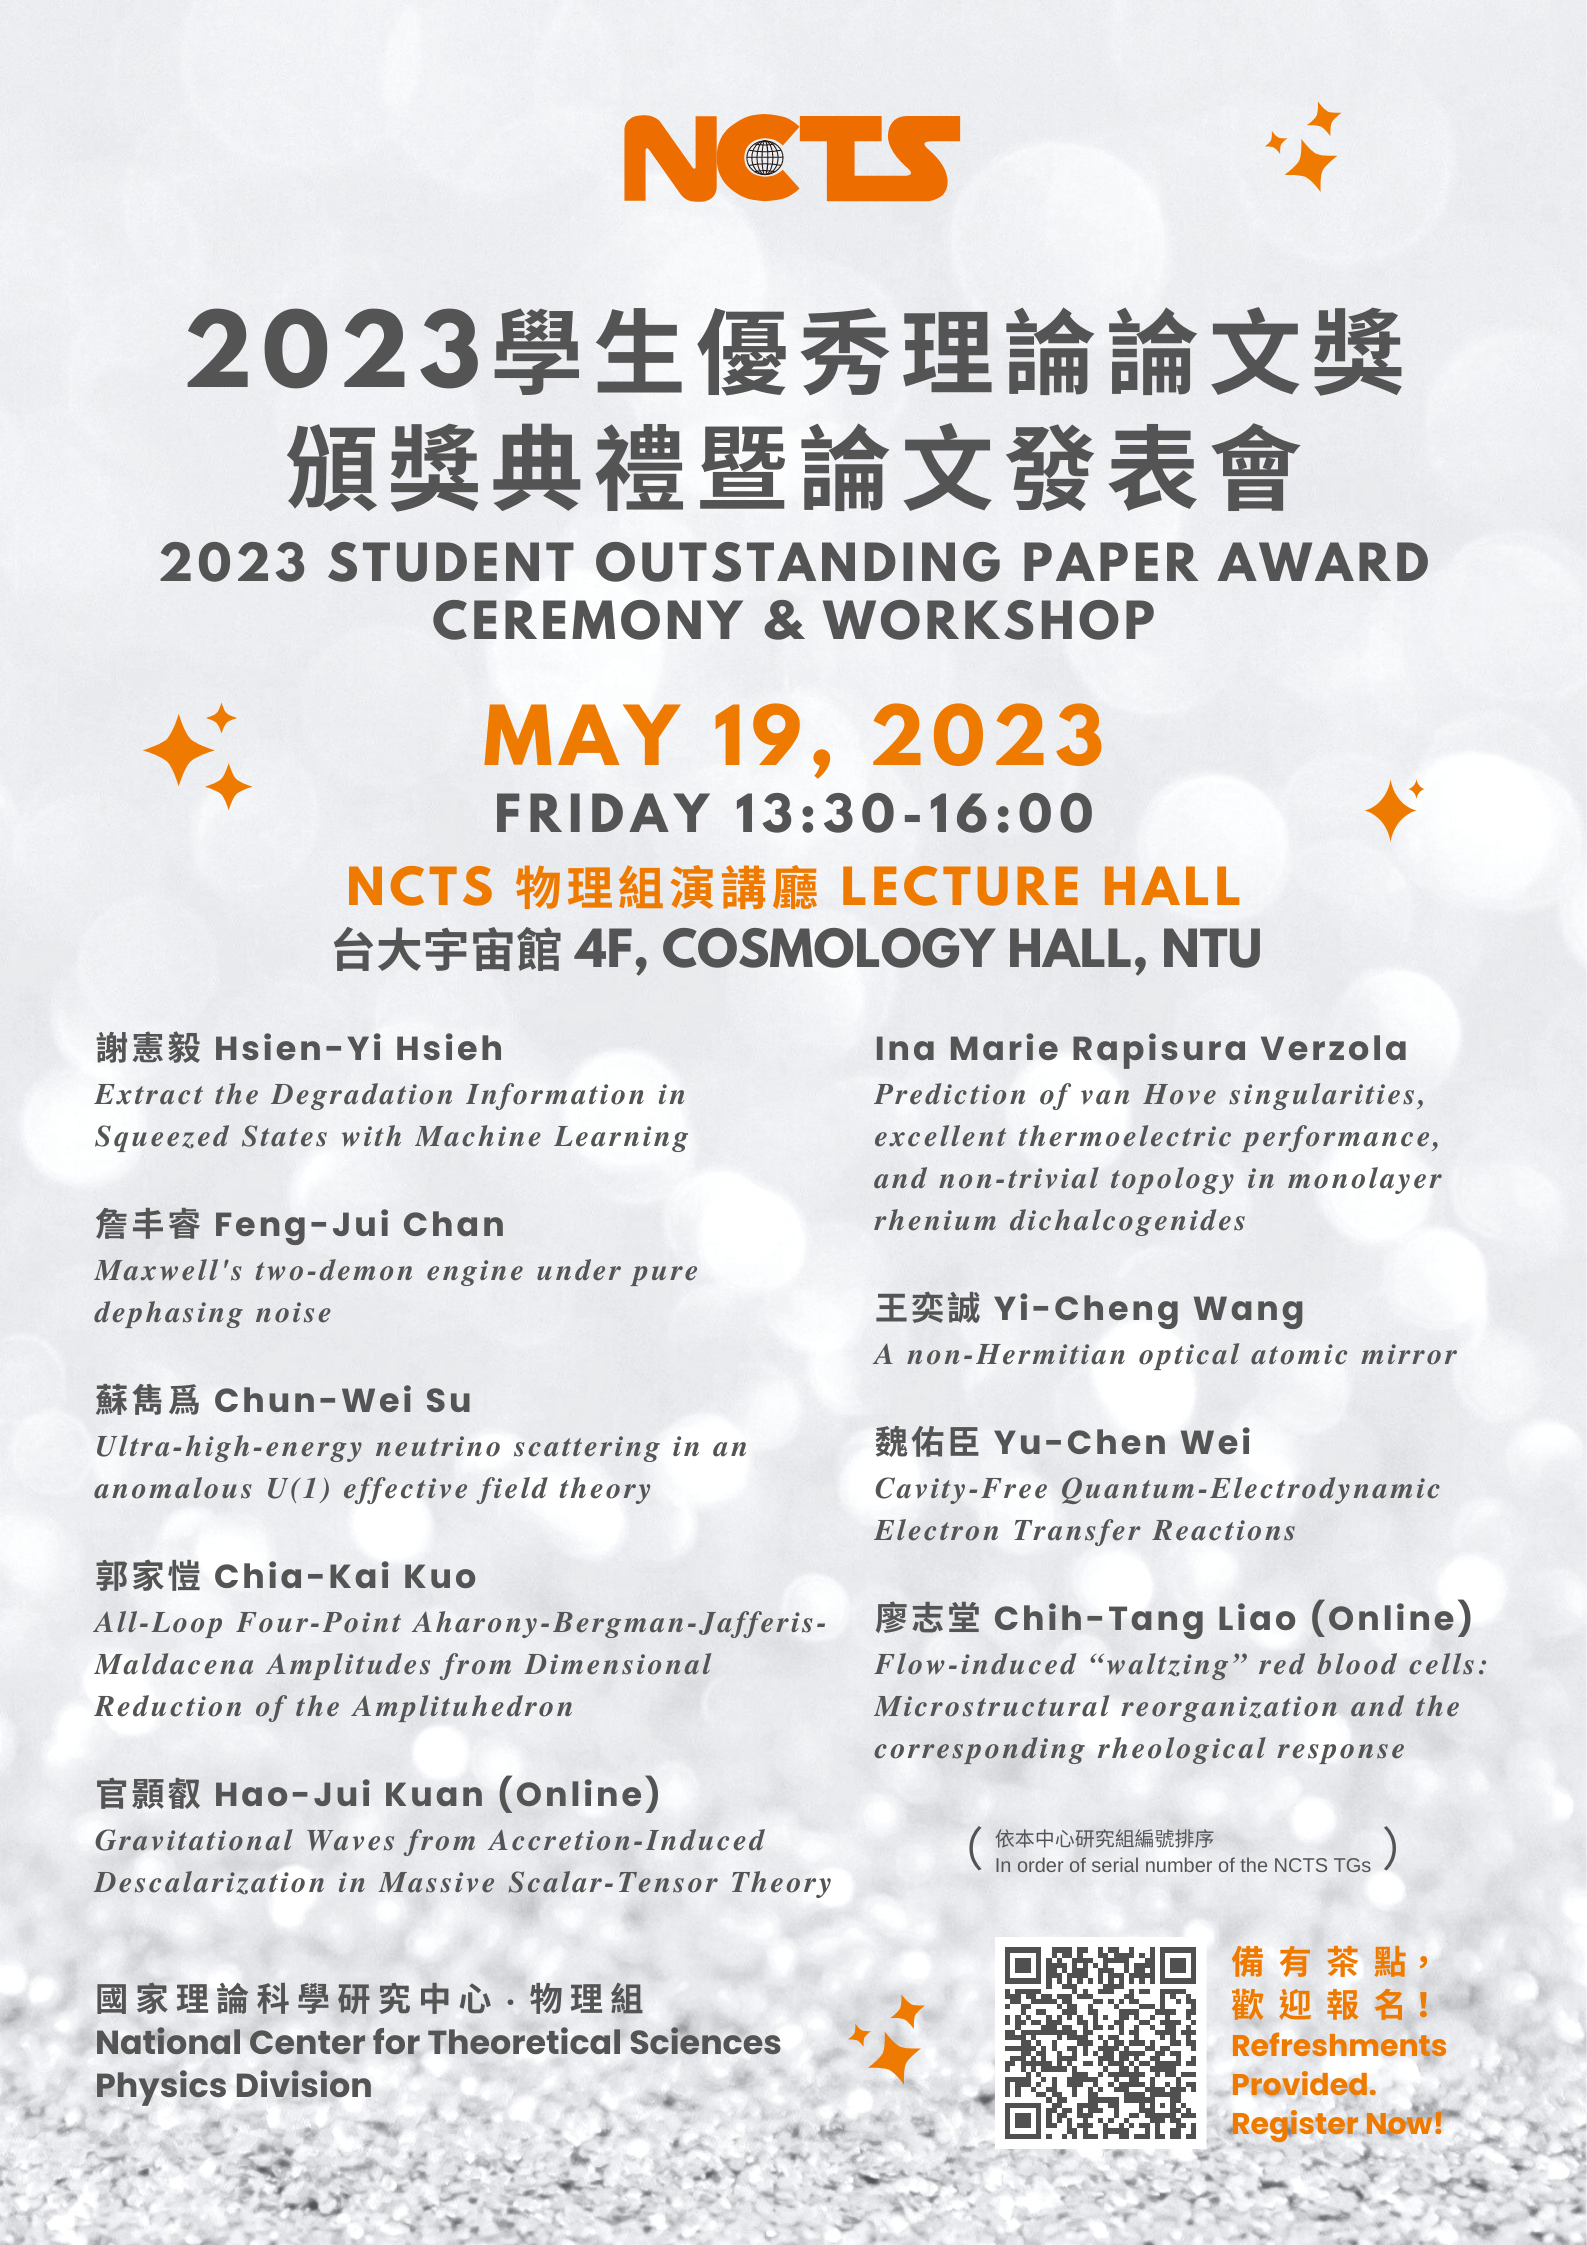 NCTS Physics 2023 Student Outstanding Paper Award Ceremony & Workshop